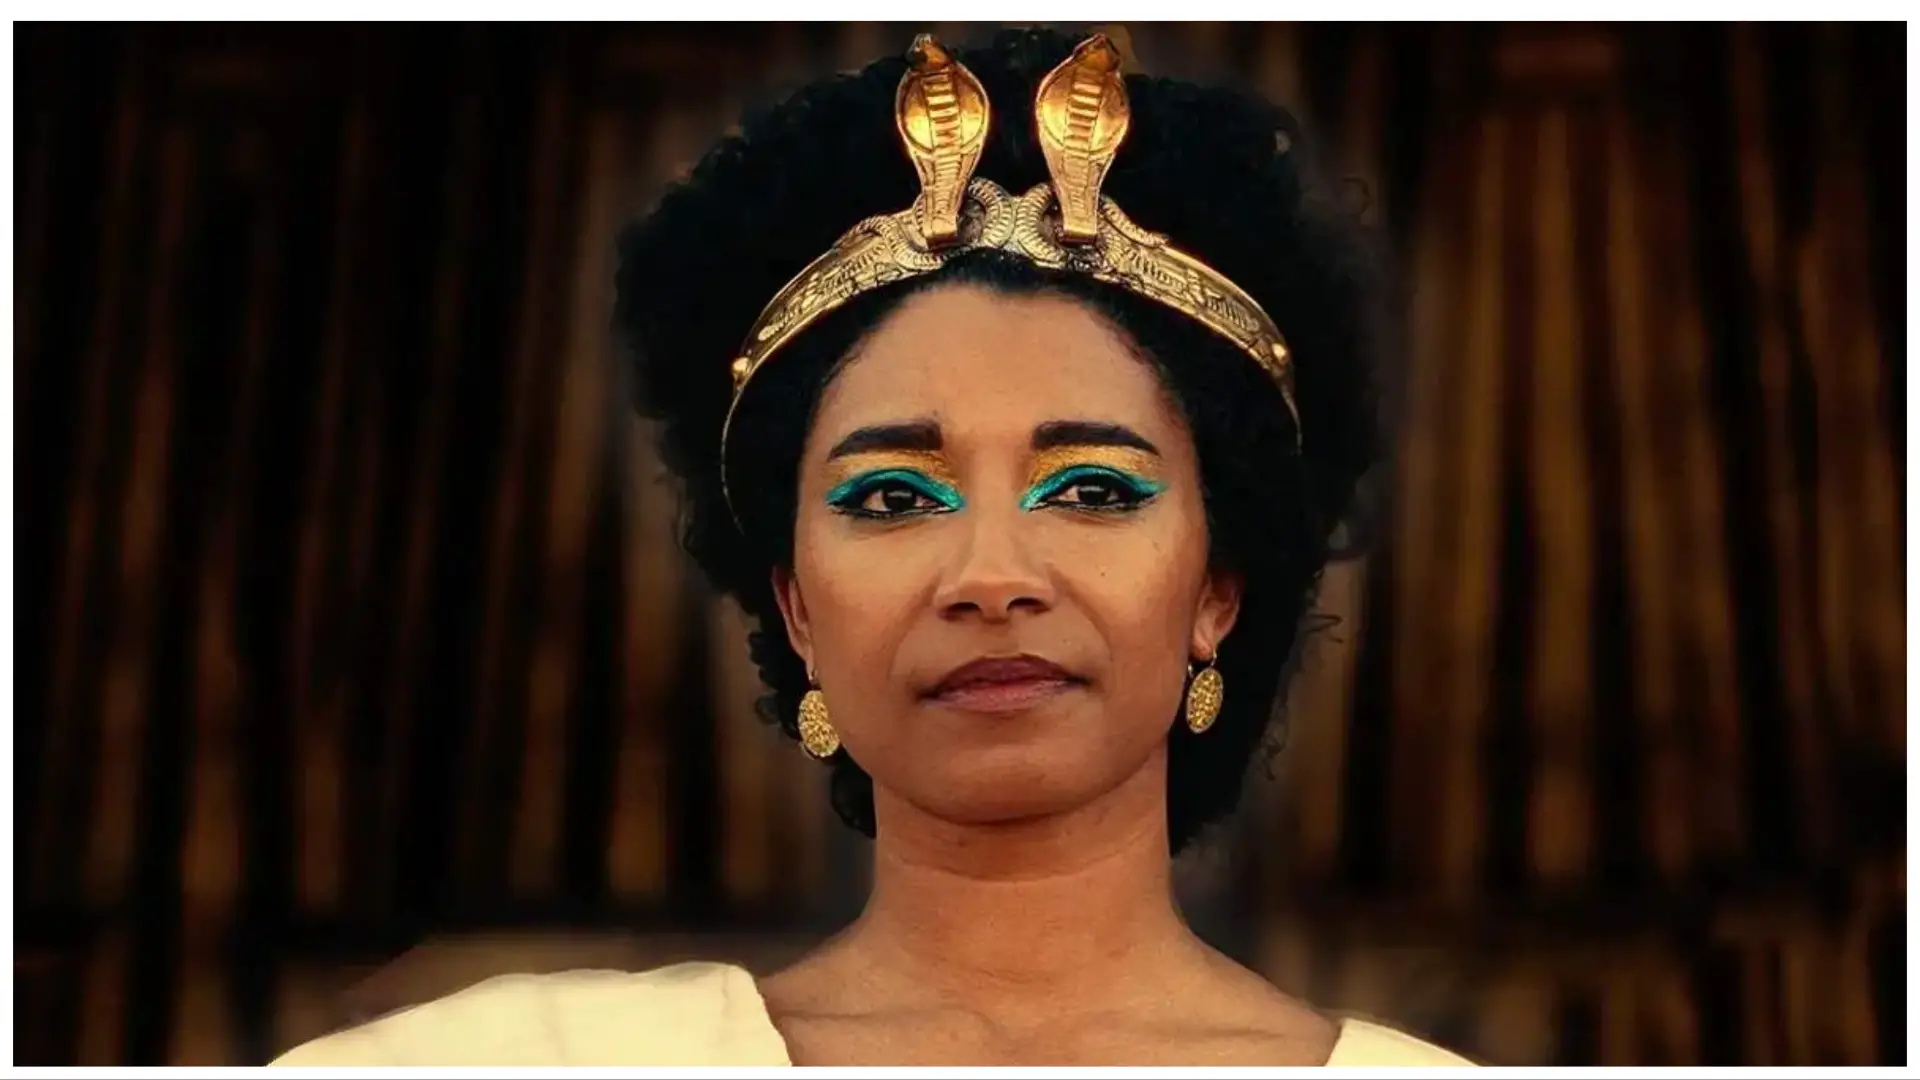 Does Queen Cleopatra Season 2 stand cancelled?